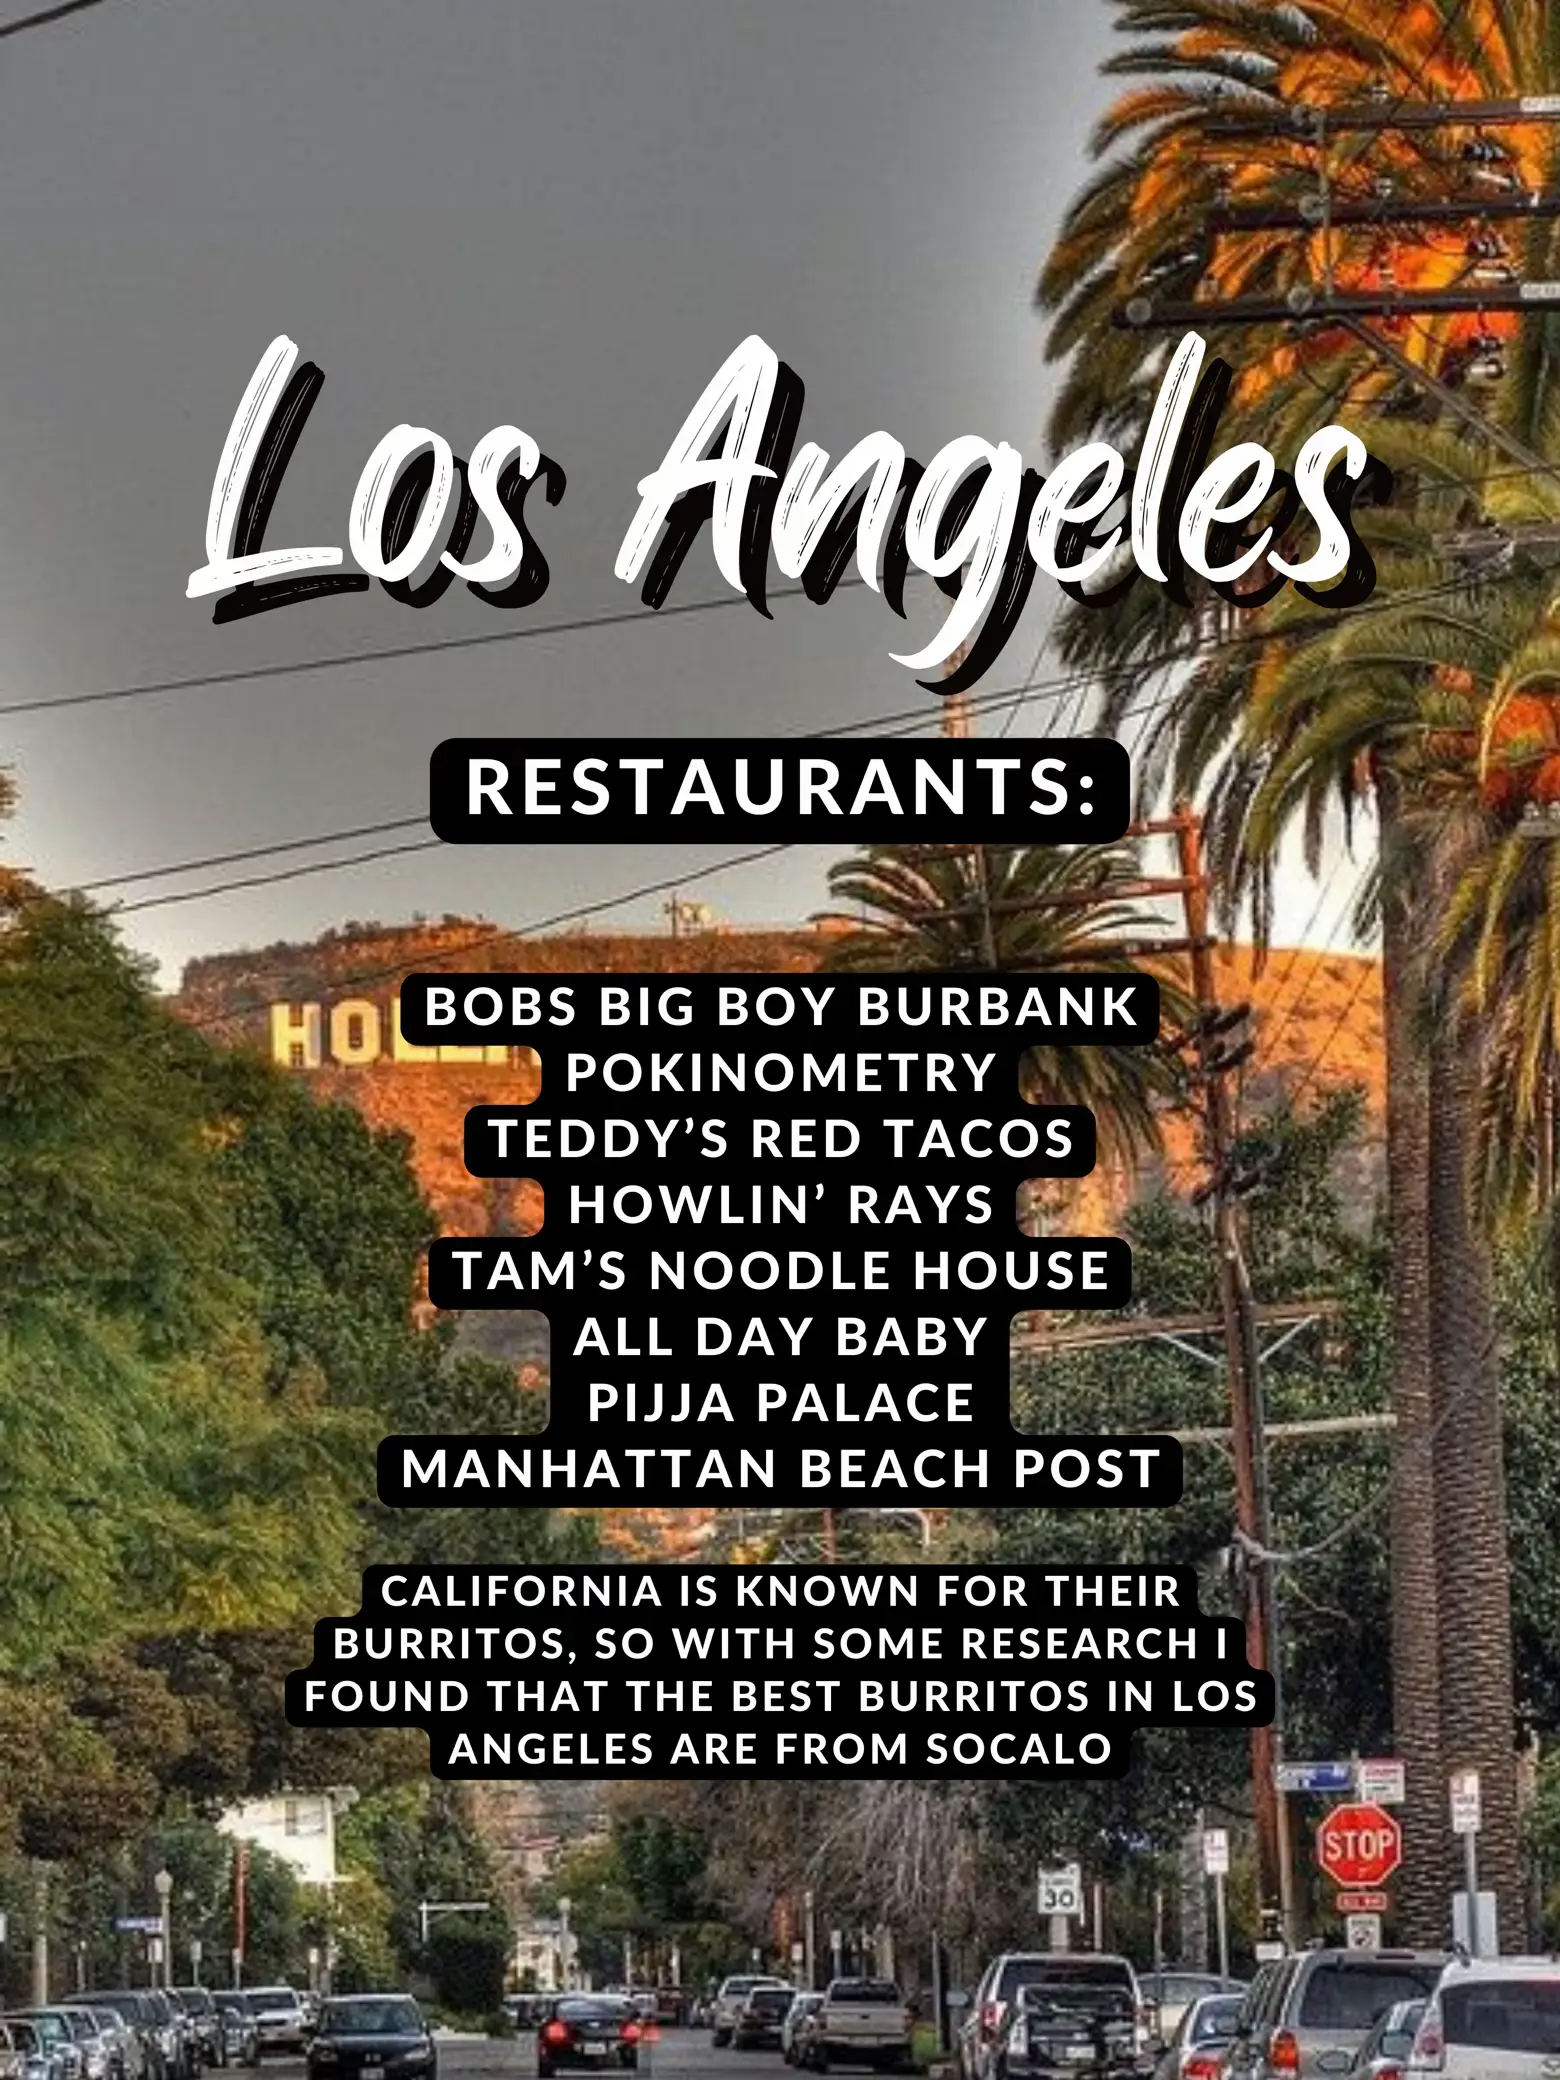  A list of restaurants in Los Angeles.